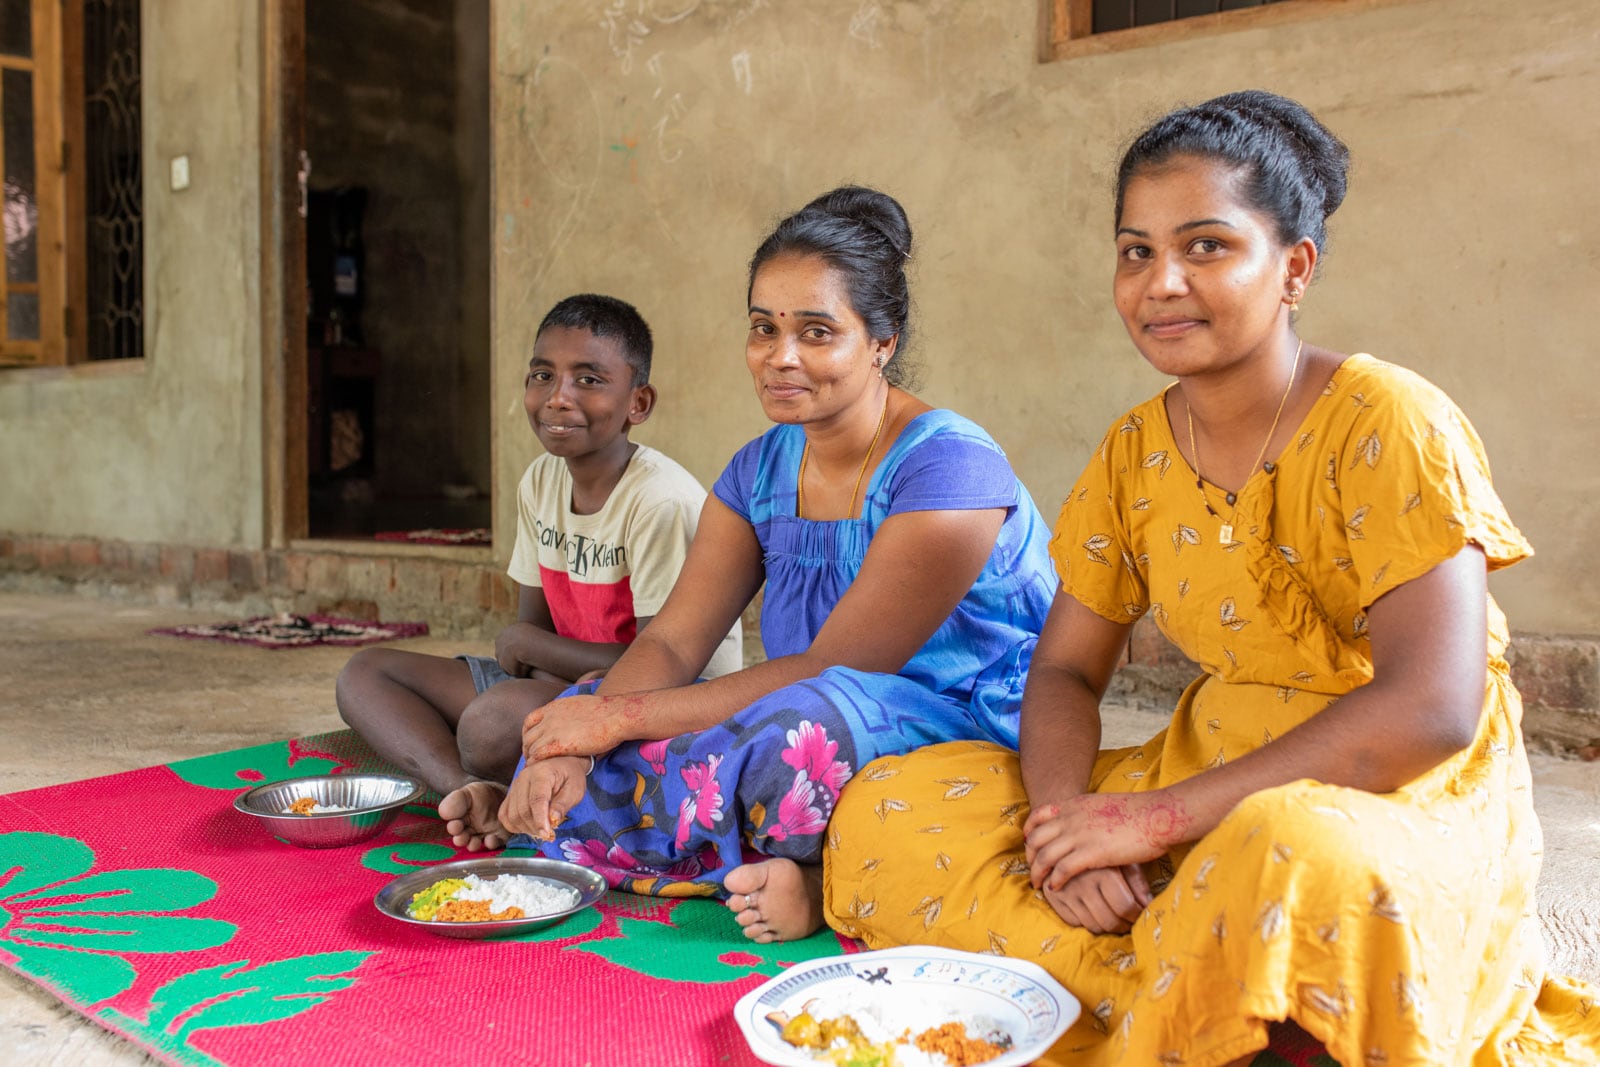 Dushiyandini is at home sitting on the ground on a mat with her daughter, Yadusha, and her son, Arikaran. They are about to eat the meal that Dushiyandini prepared for them.